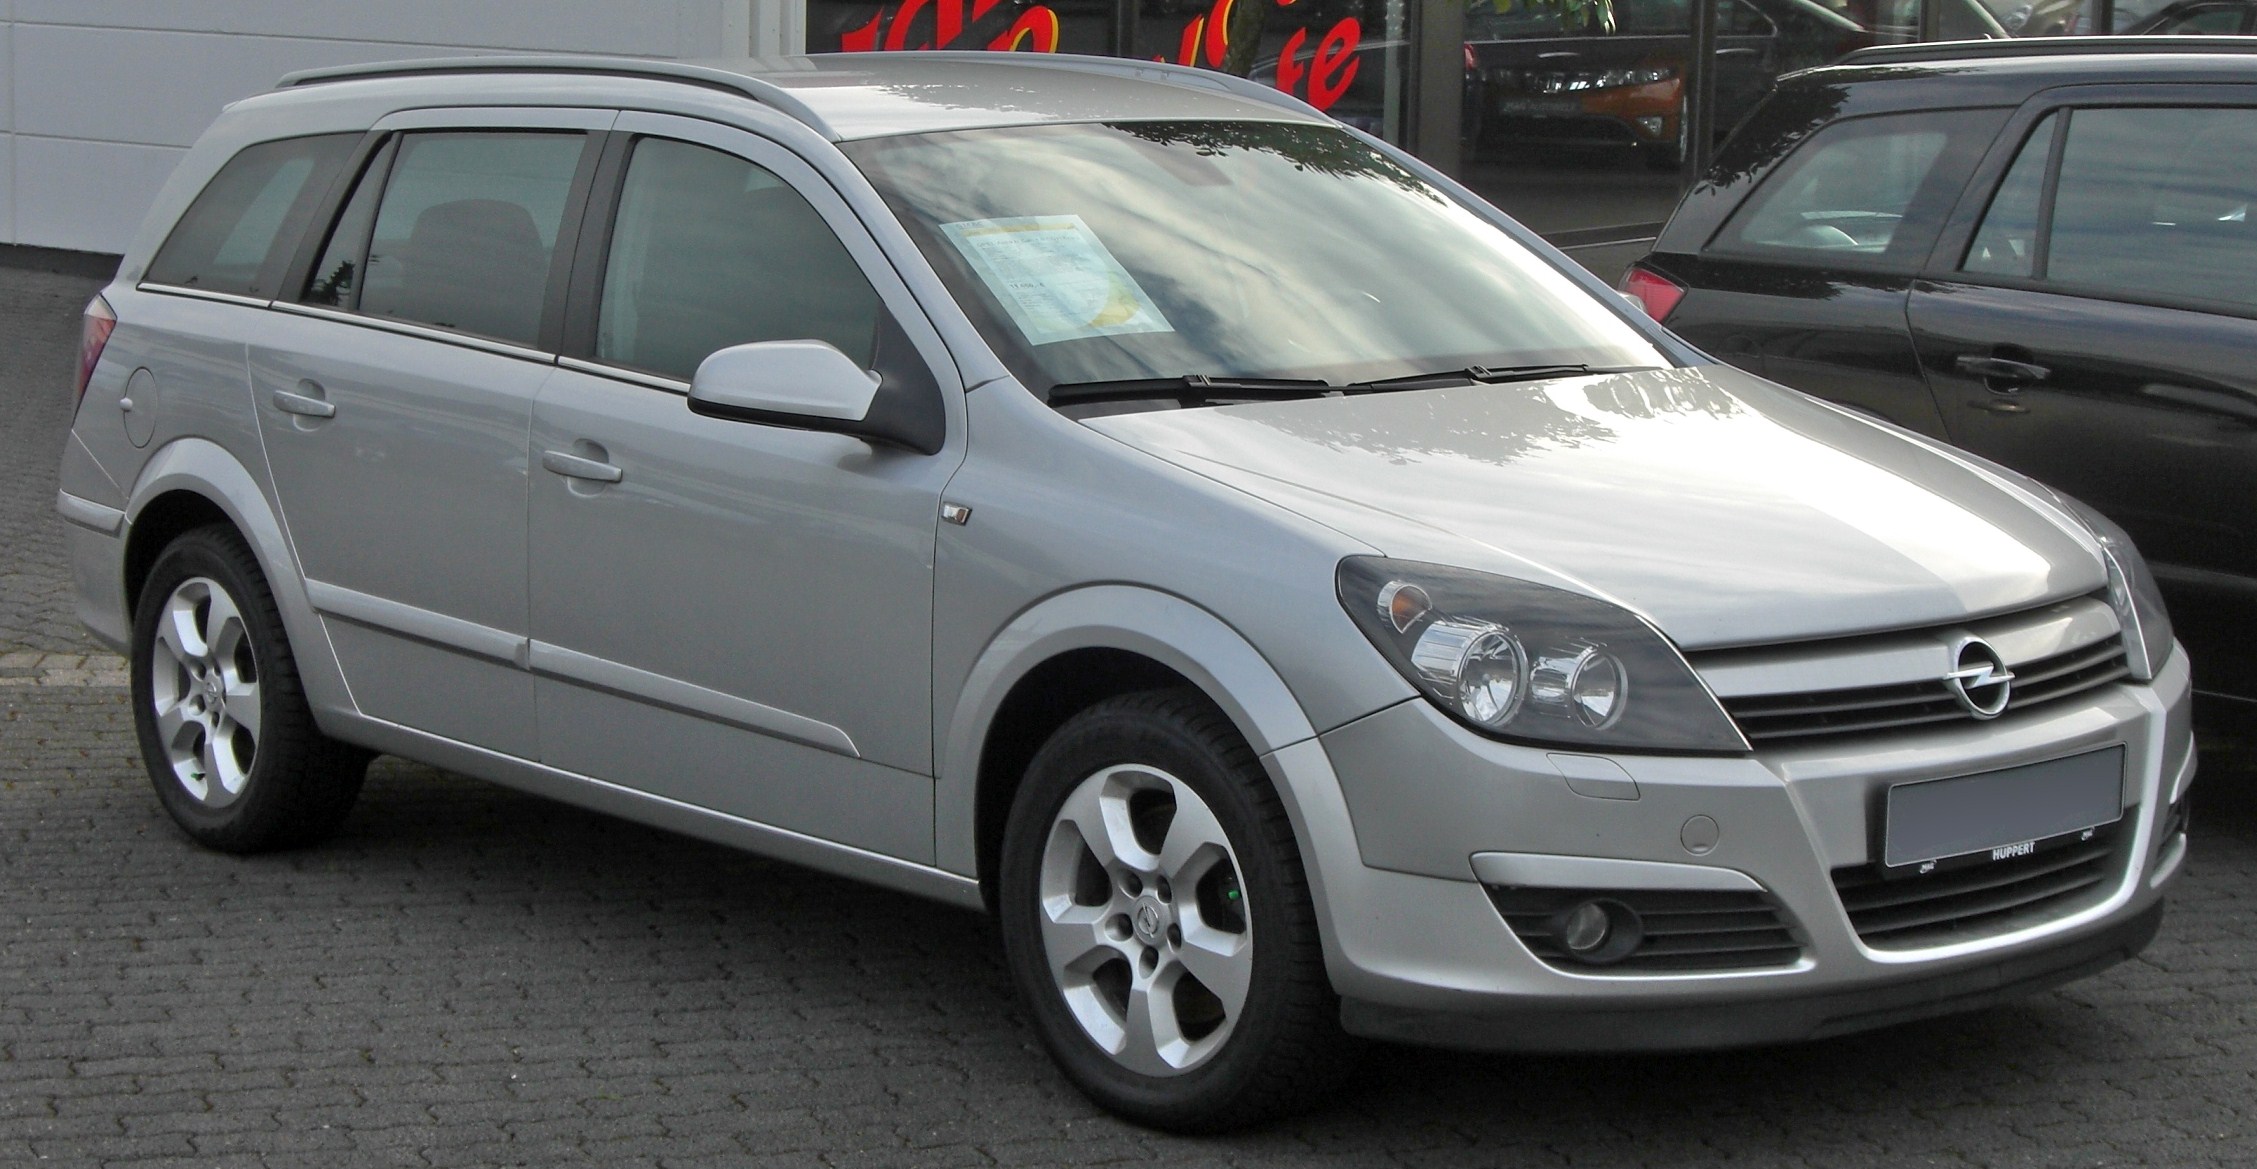 File:Opel Astra H 1.9 CDTI Caravan Edition Facelift front 20100519.jpg -  Wikimedia Commons